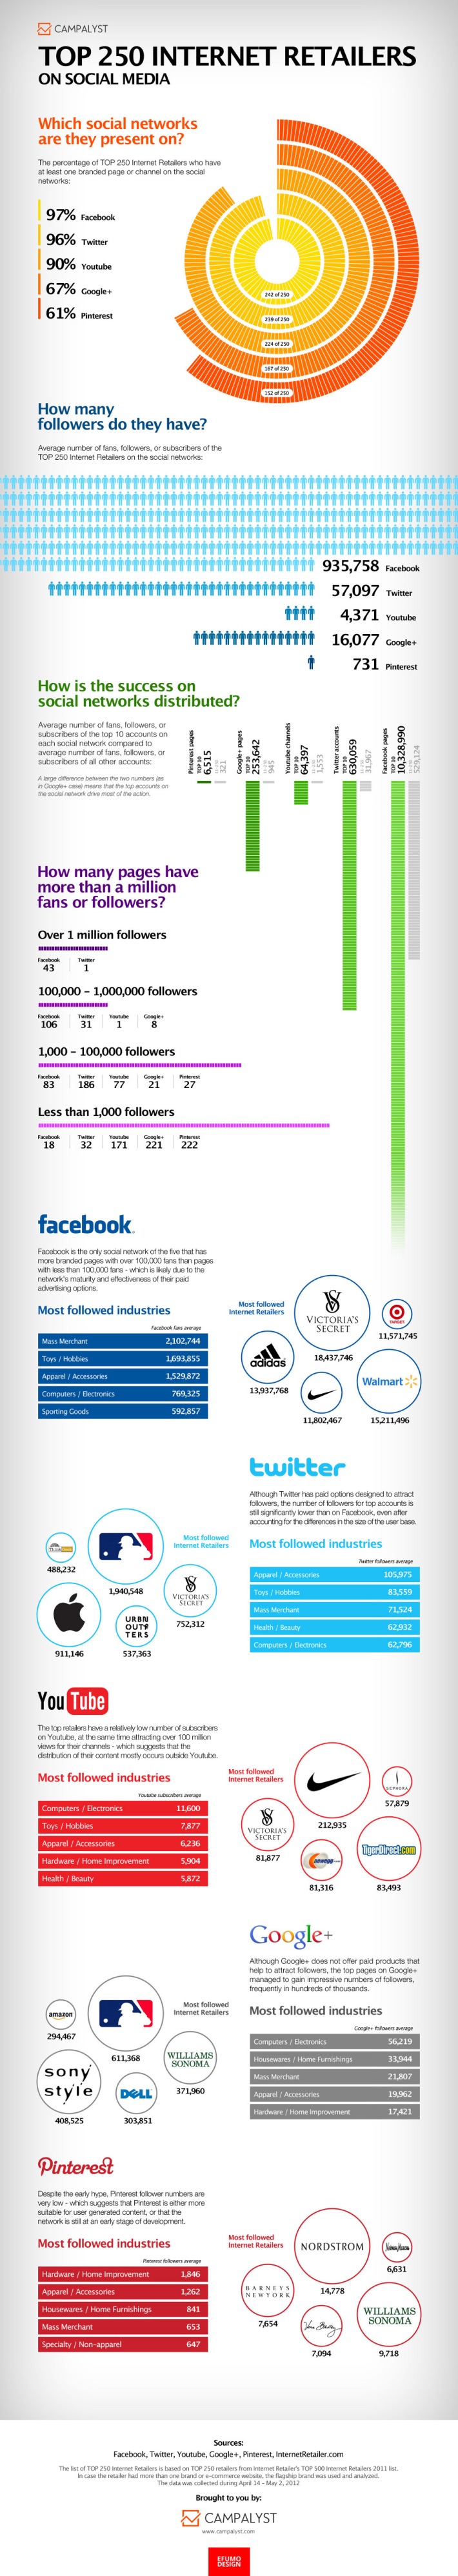 Who Are the Top Retailers on Social Media? [INFOGRAPHIC]